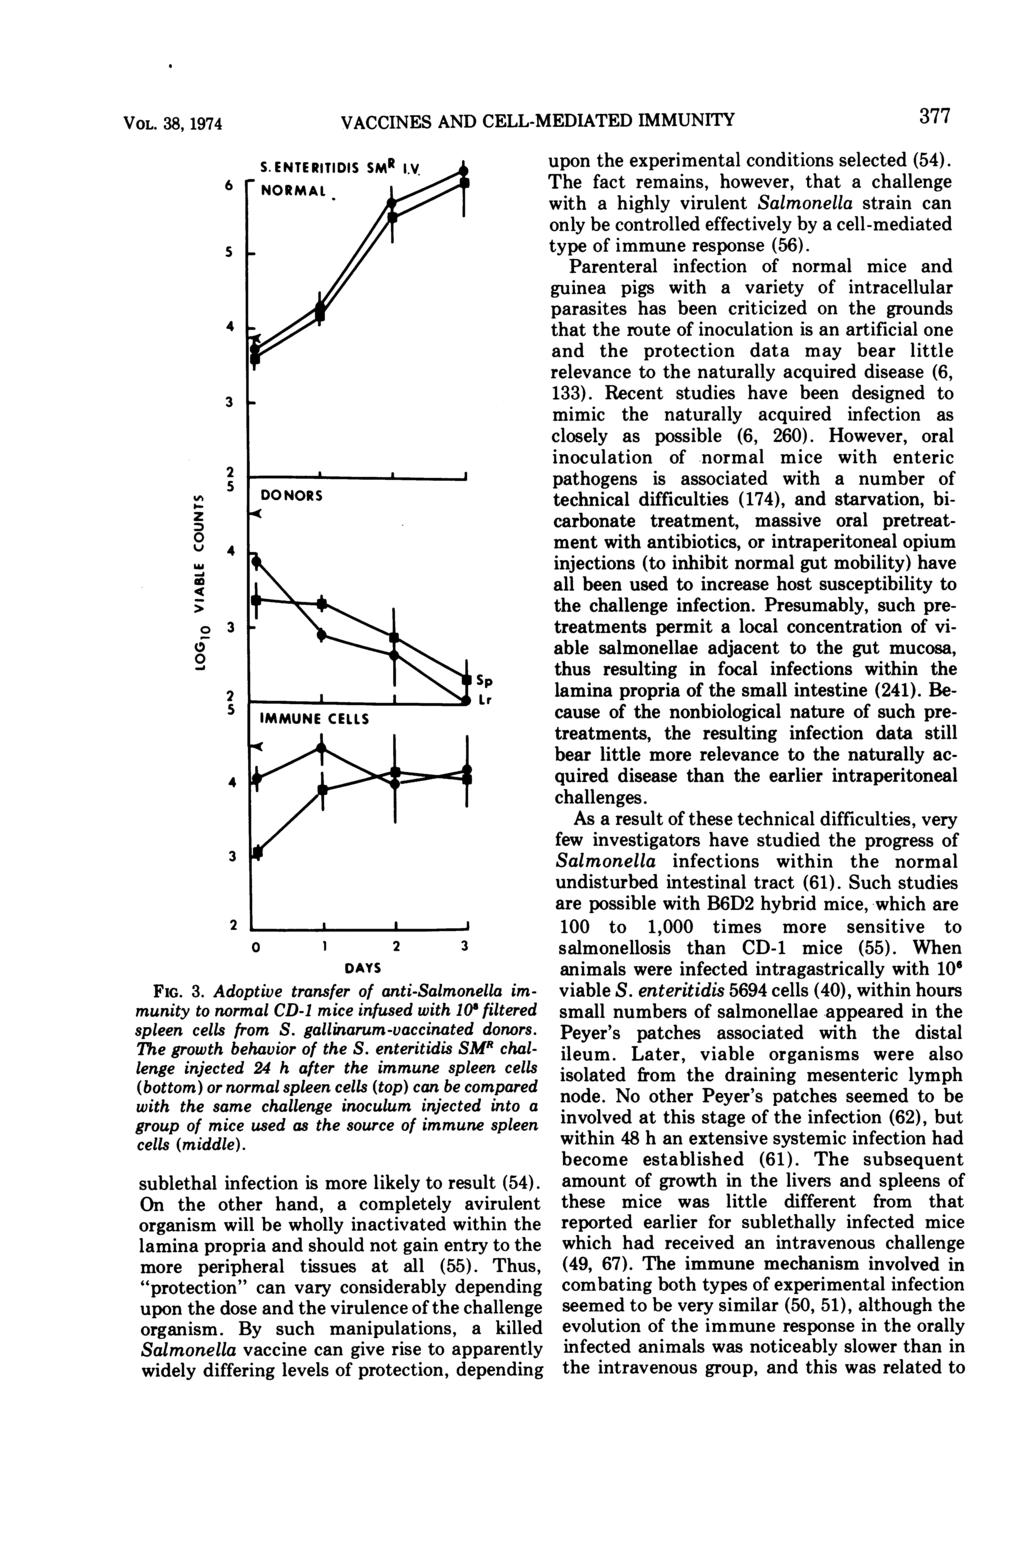 VOL. 38, 1974 %A z u (5 a 6 5 4 3 2 5 4 VACCINES AND CELL-MEDIATED IMMUNITY 2 1 '- Lr IMMUNE CELLS 4 3 2 I I 1 2 3 DAYS FIG. 3. Adoptive transfer of anti-salmonella immunity to normal CD-I mice infused with 1 filtered spleen cells from S.